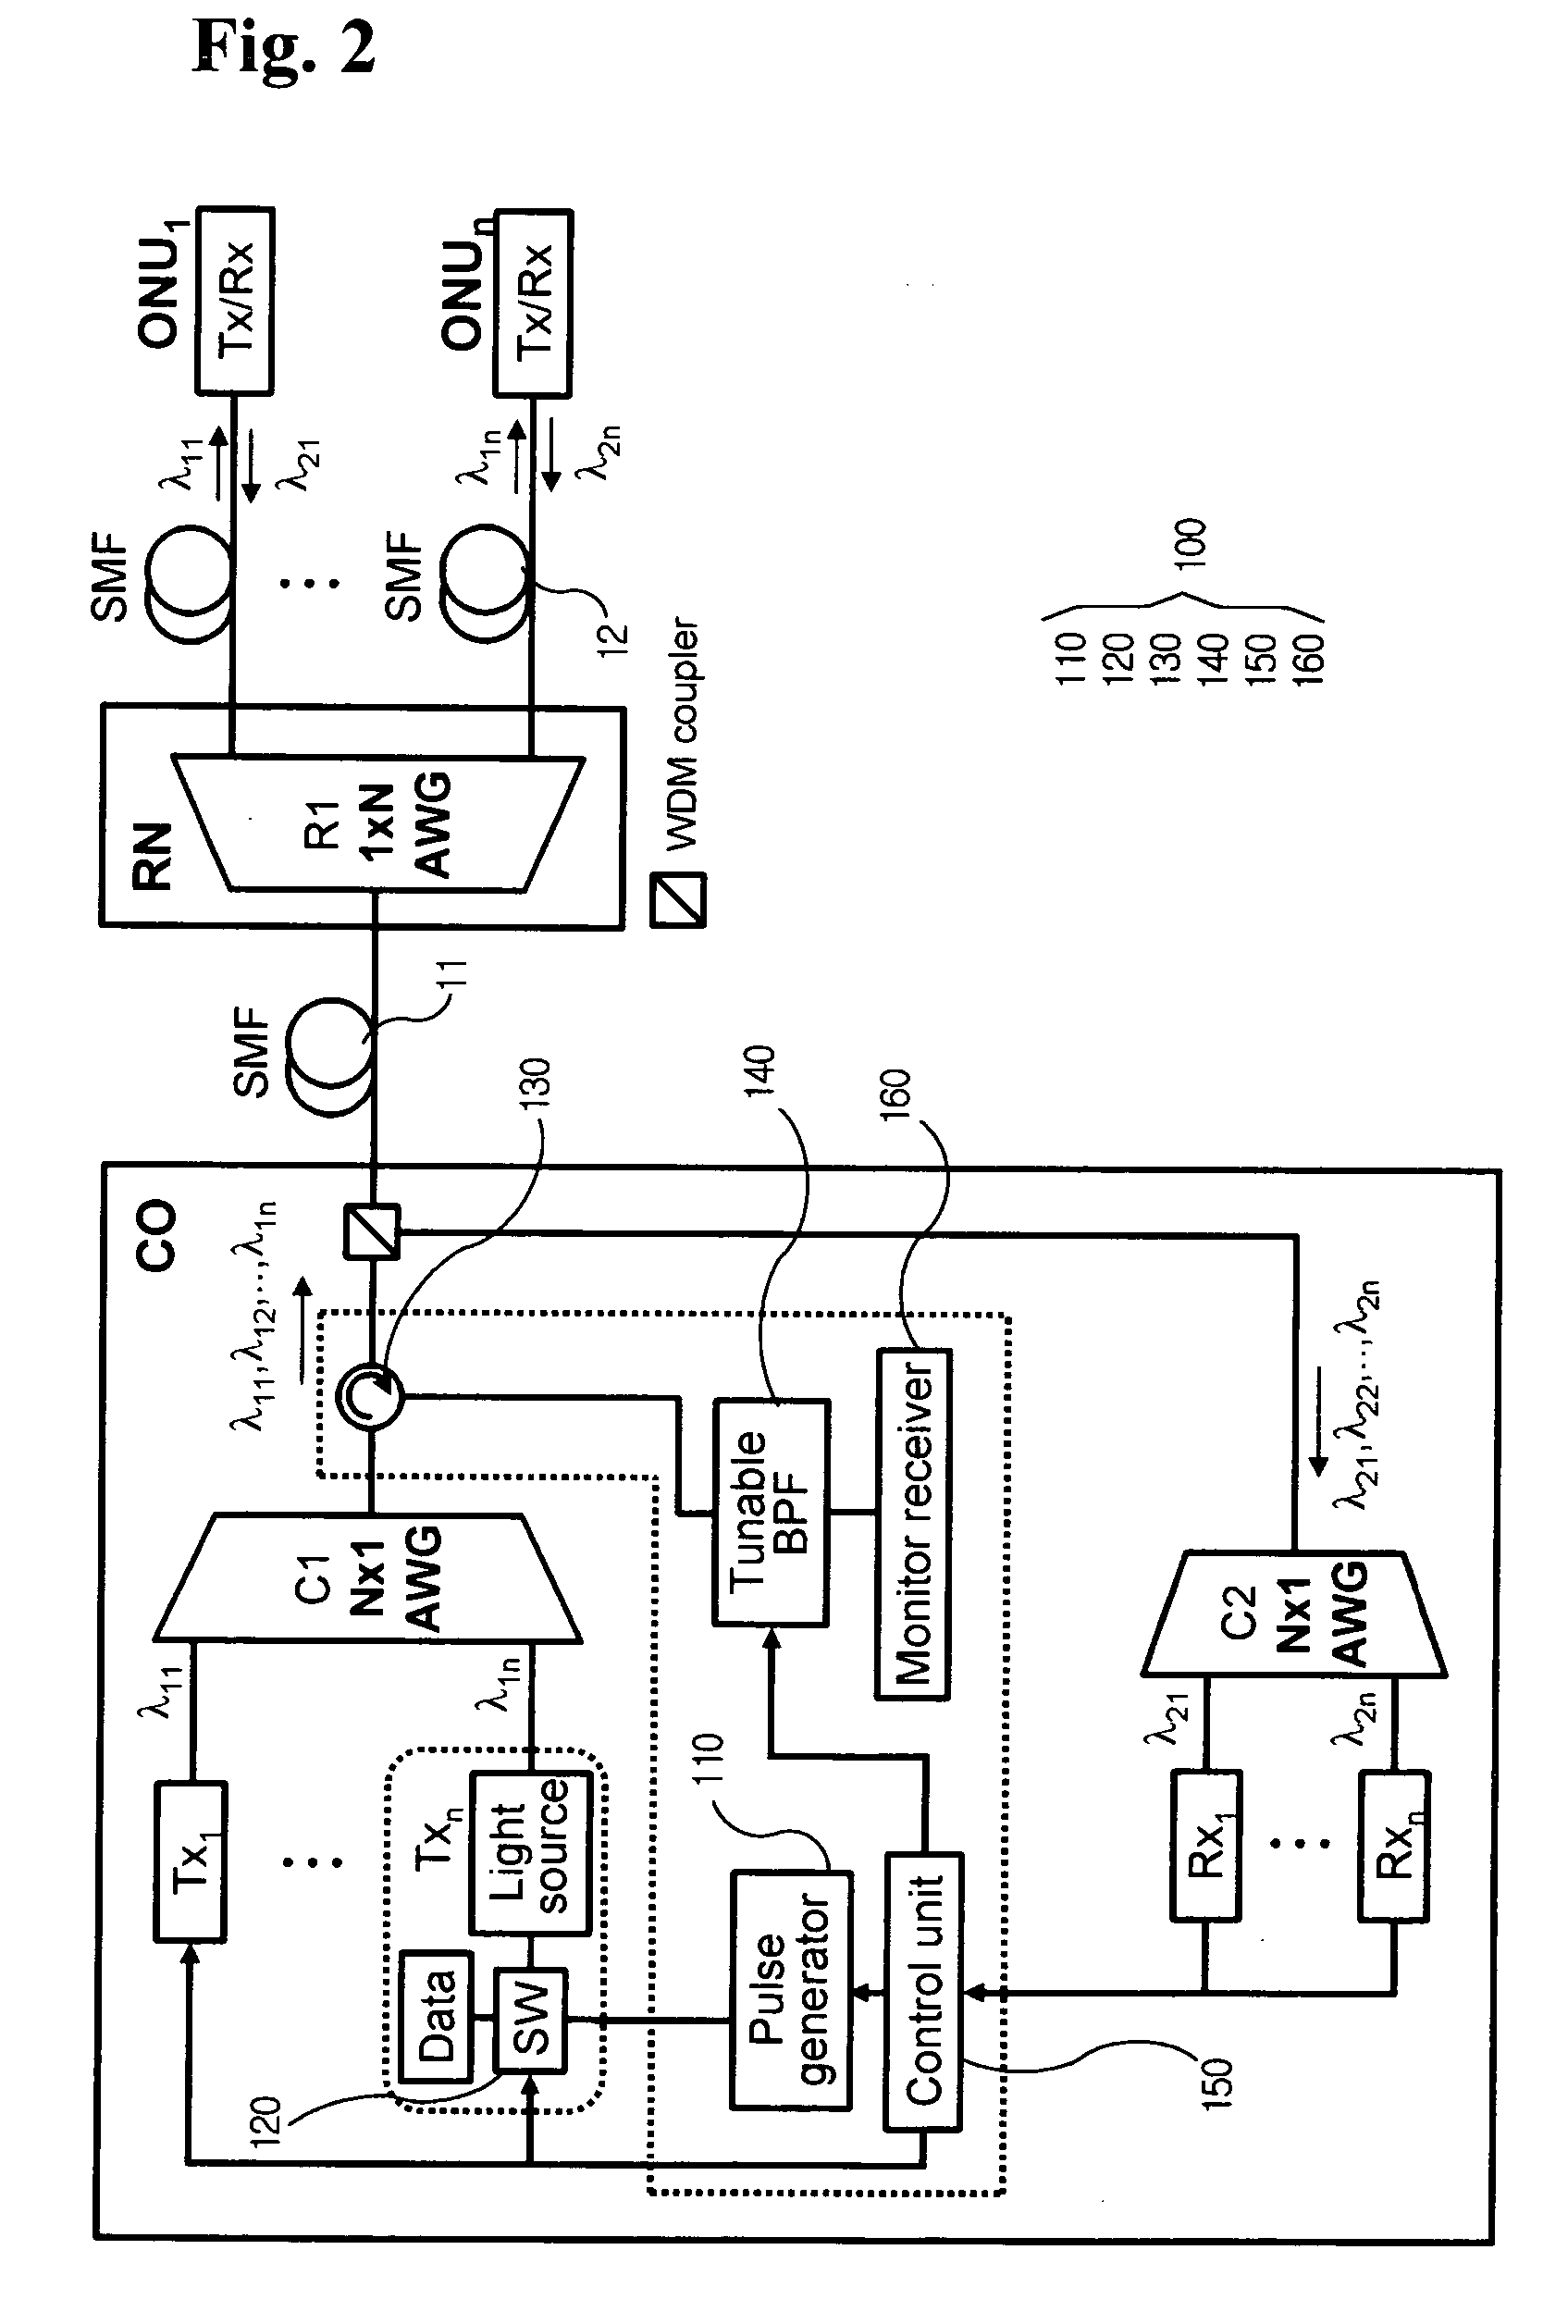 Fault localization apparatus for optical line in wavelength division multiplexed passive optical network